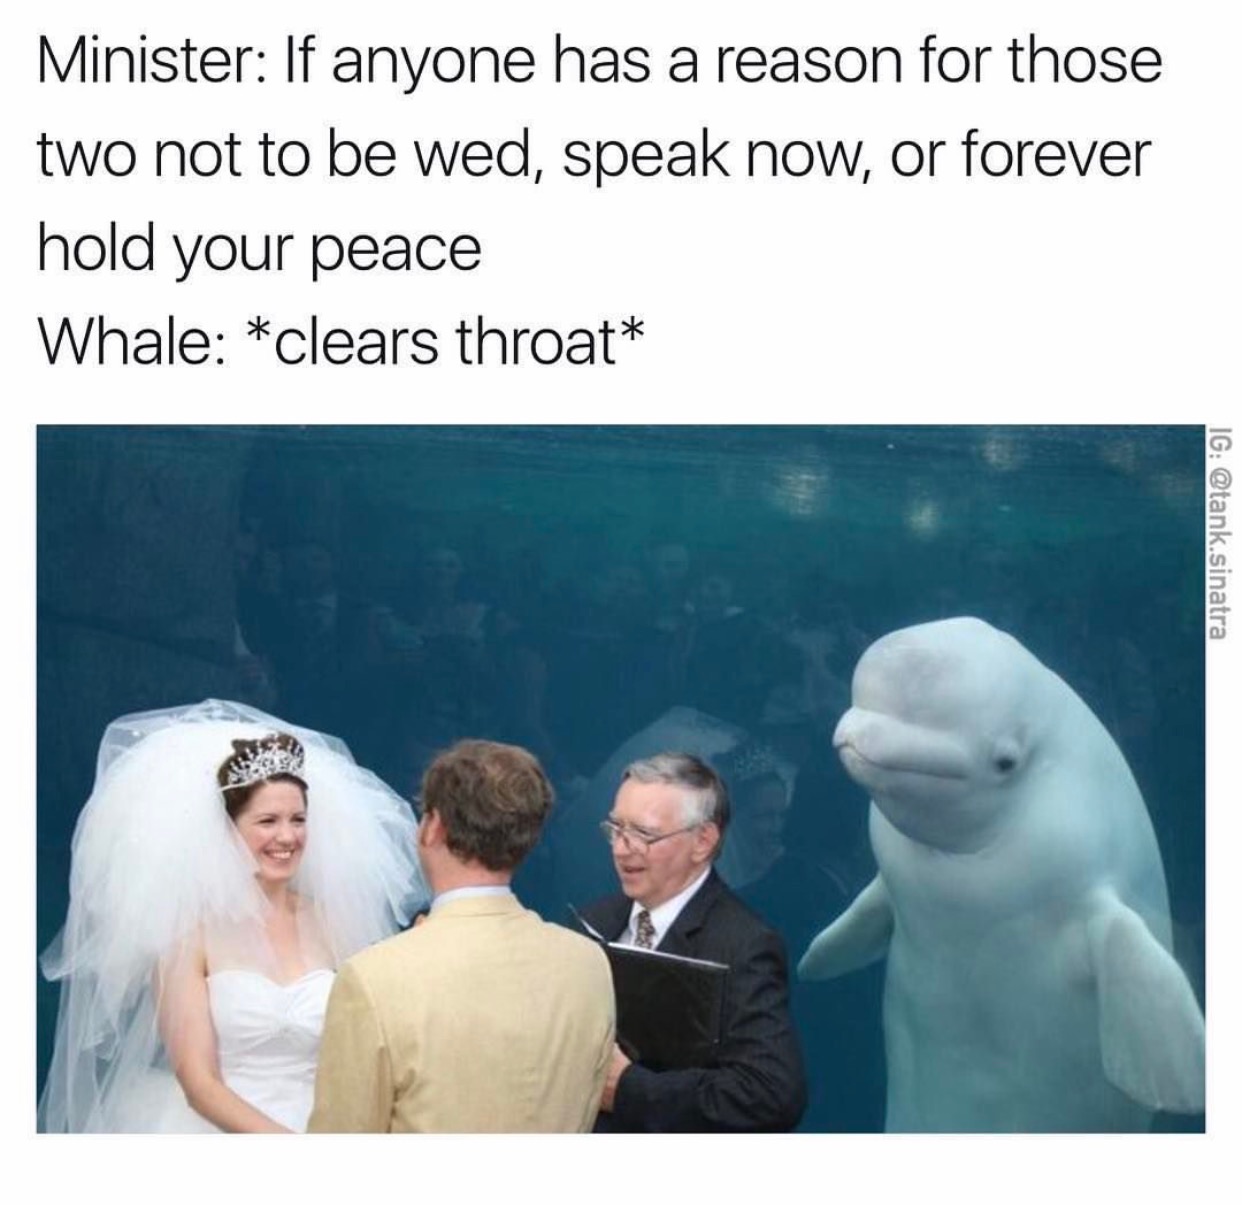 beluga whale memes - Minister If anyone has a reason for those two not to be wed, speak now, or forever hold your peace Whale clears throat Ig .sinatra